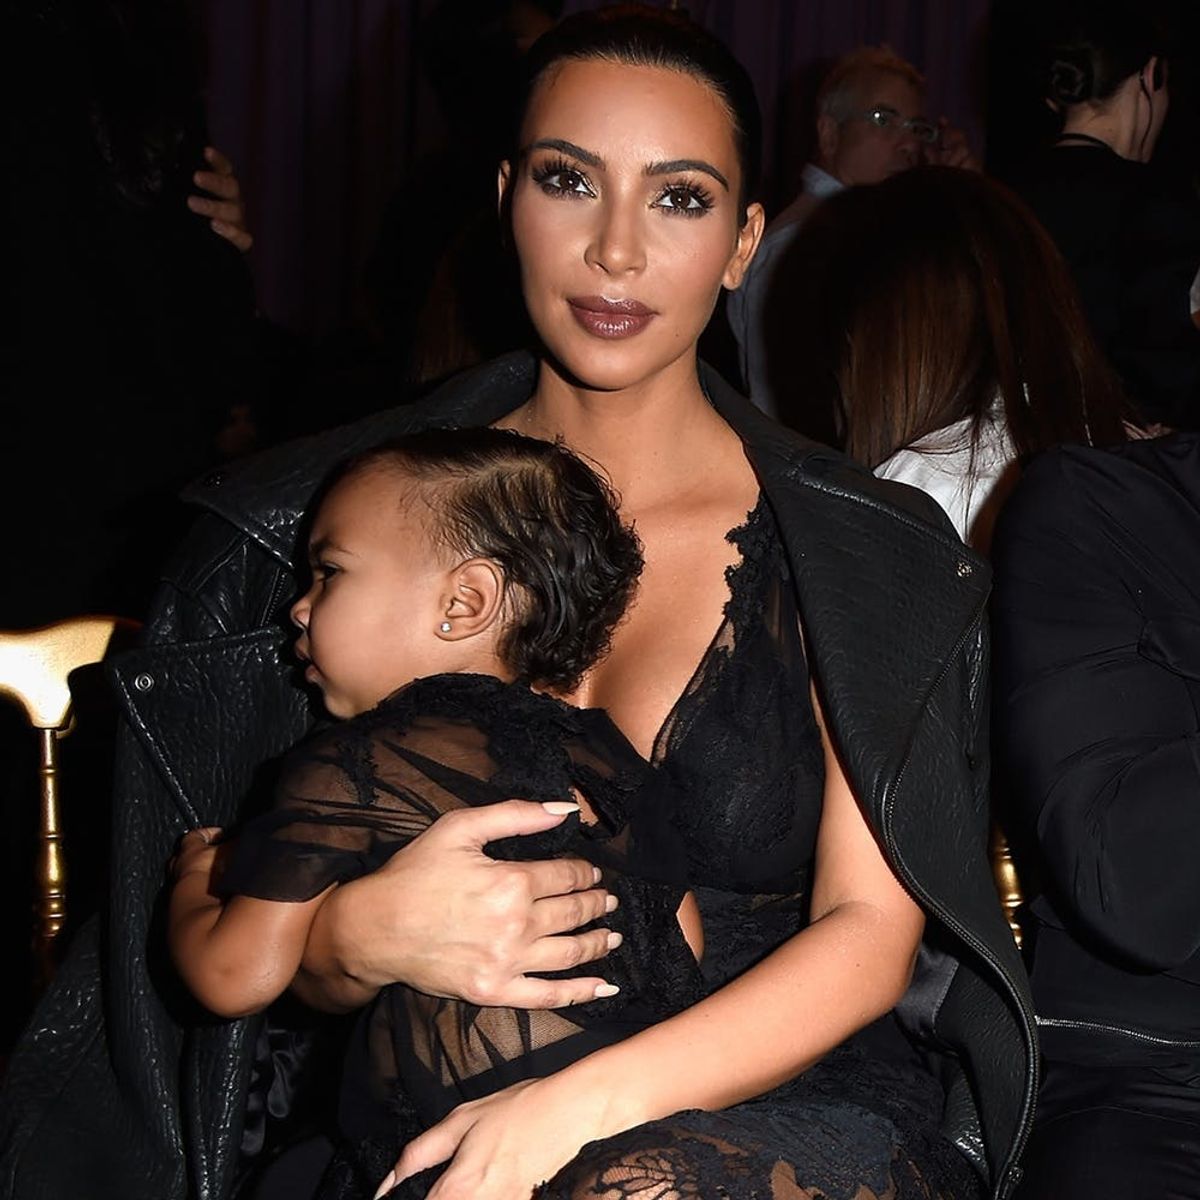 Kim Kardashian West’s Pregnancy Announcement Is Exactly What You’d Expect